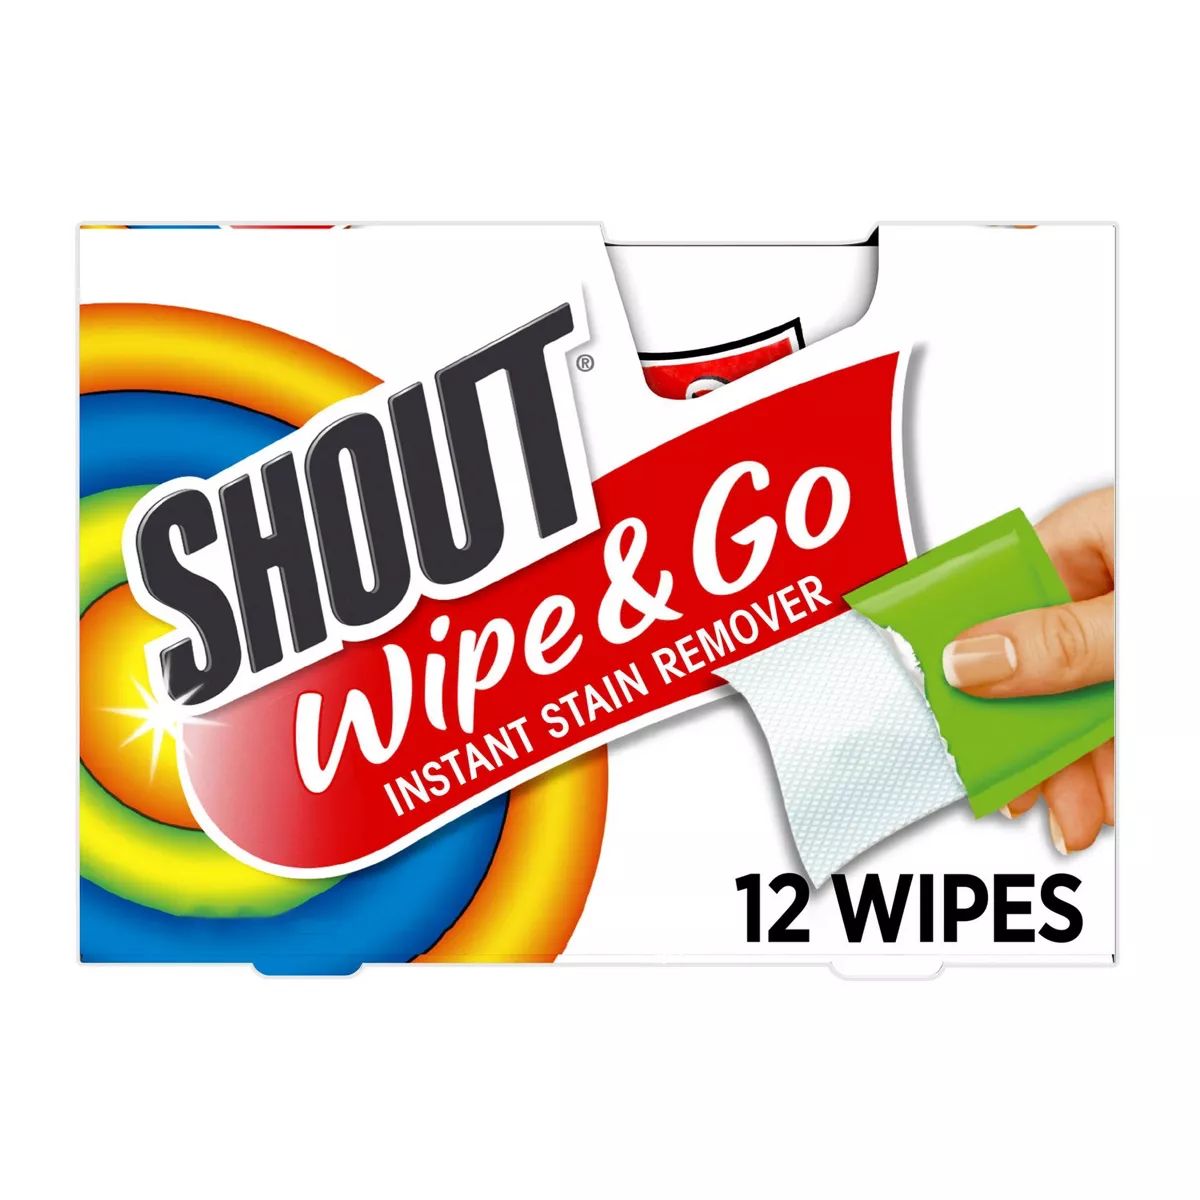 Shout Wipe & Go Instant Stain Remover - 12ct | Target